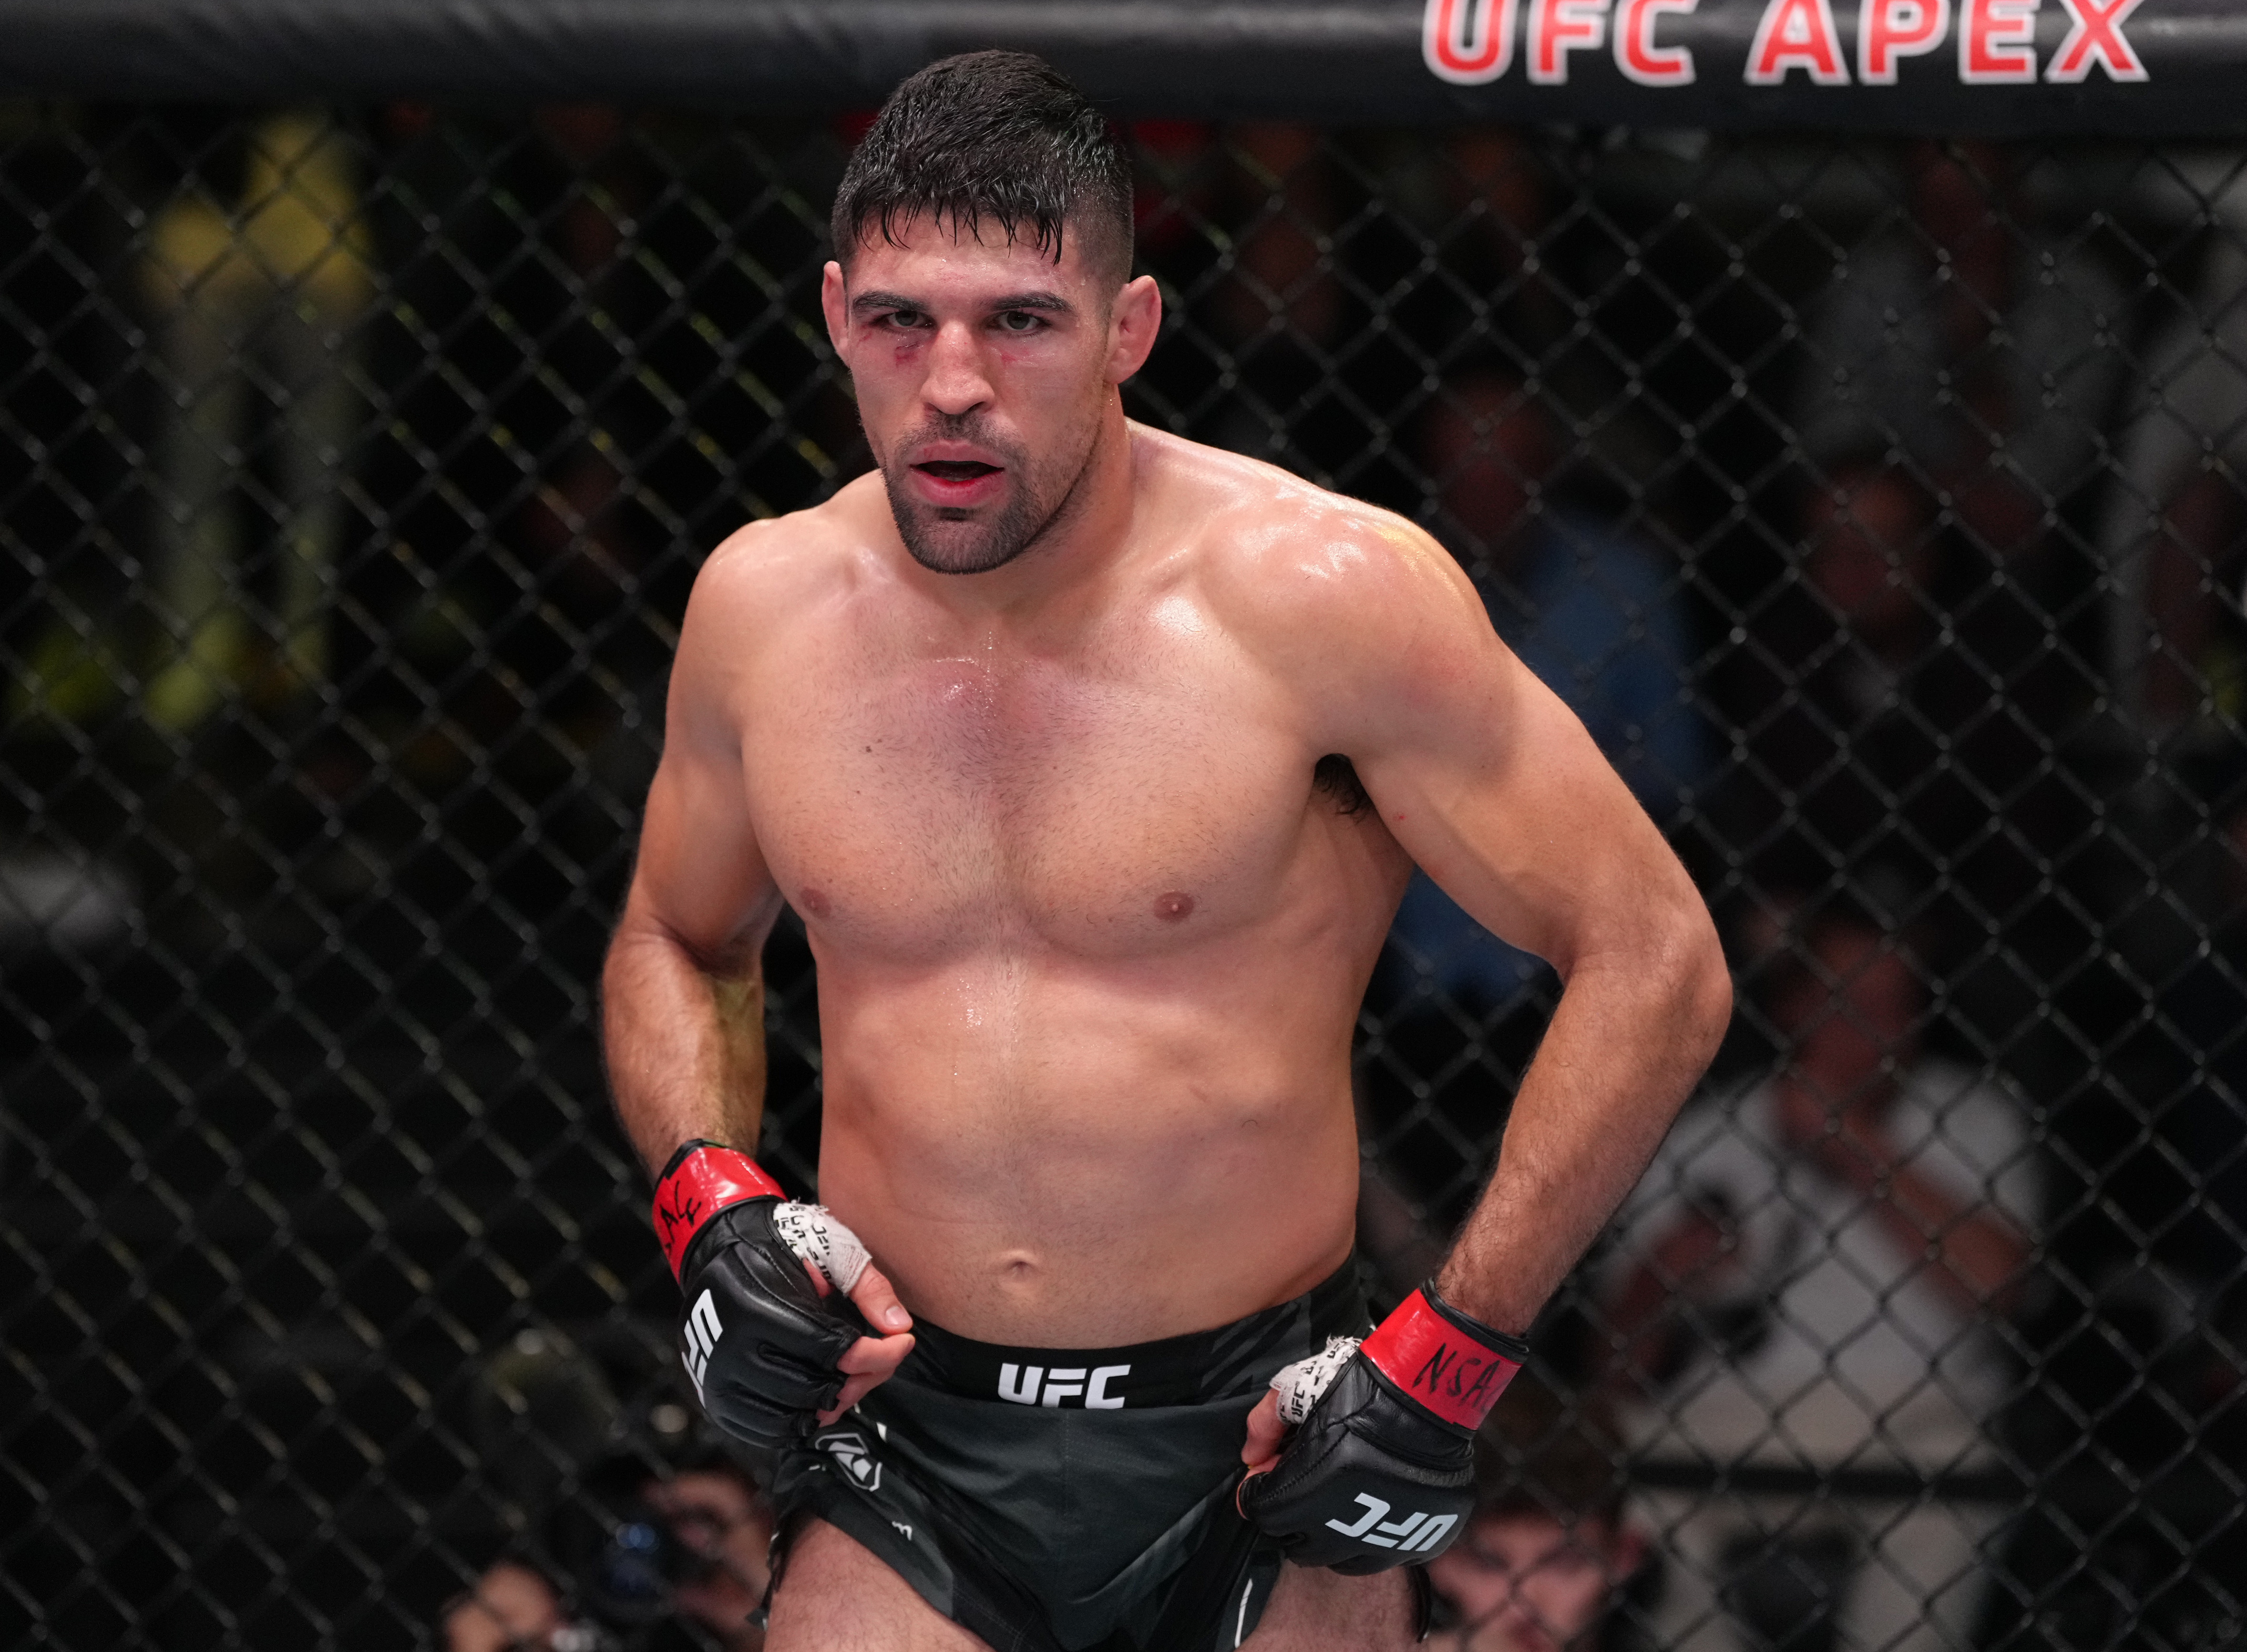 Vicente Luque dropped a unanimous decision to Belal Muhammad.